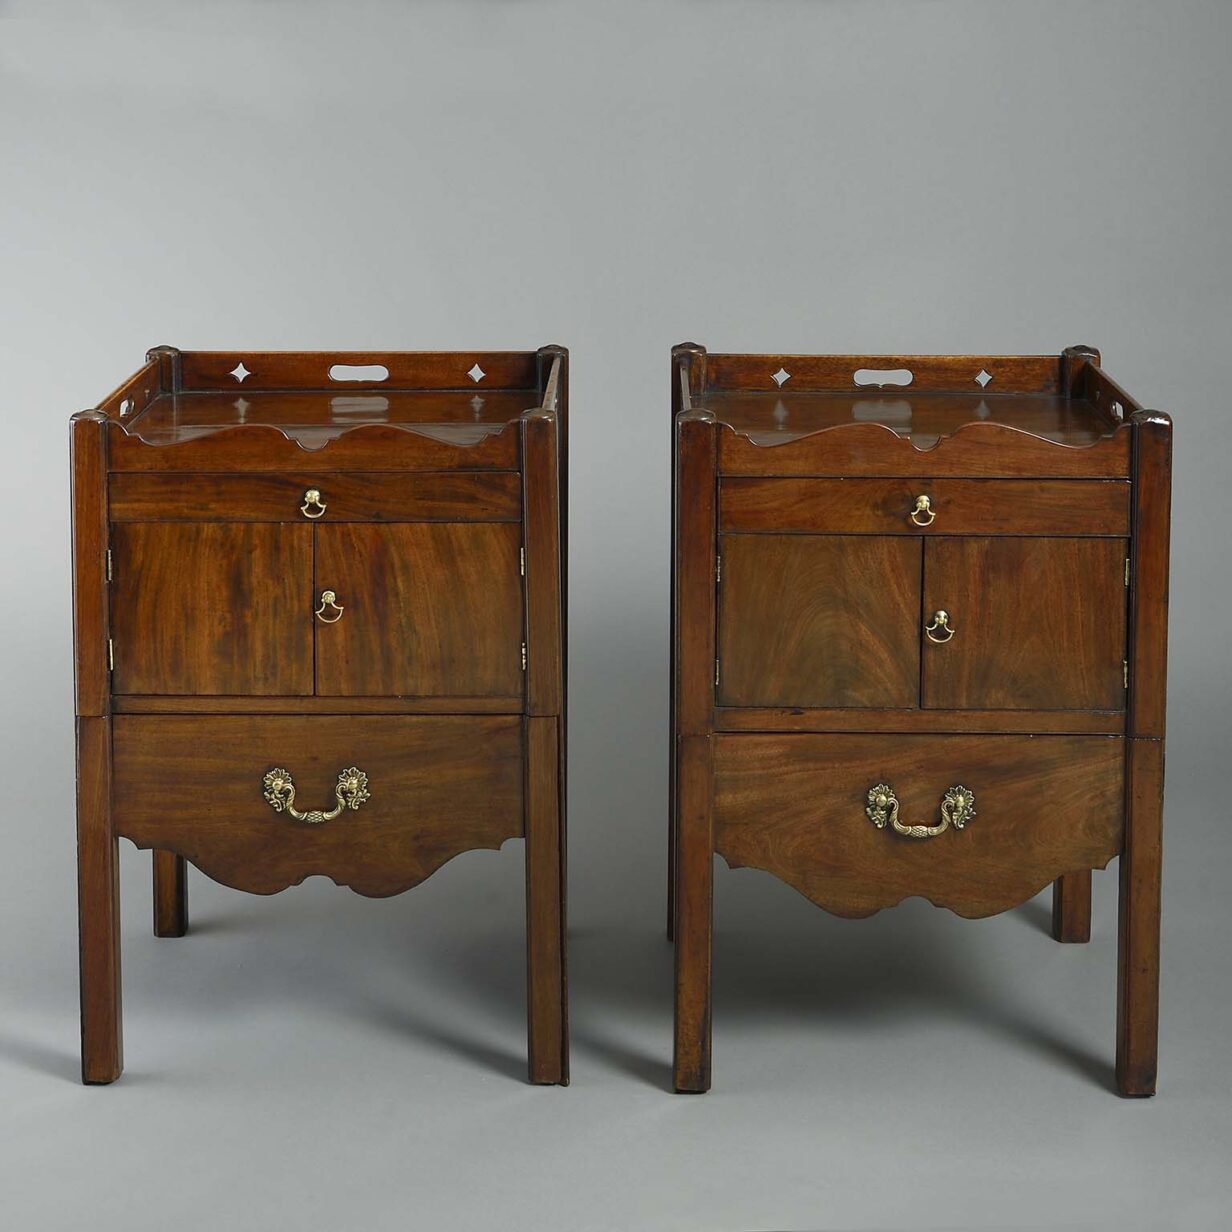 Pair of chippendale period bedside cabinets